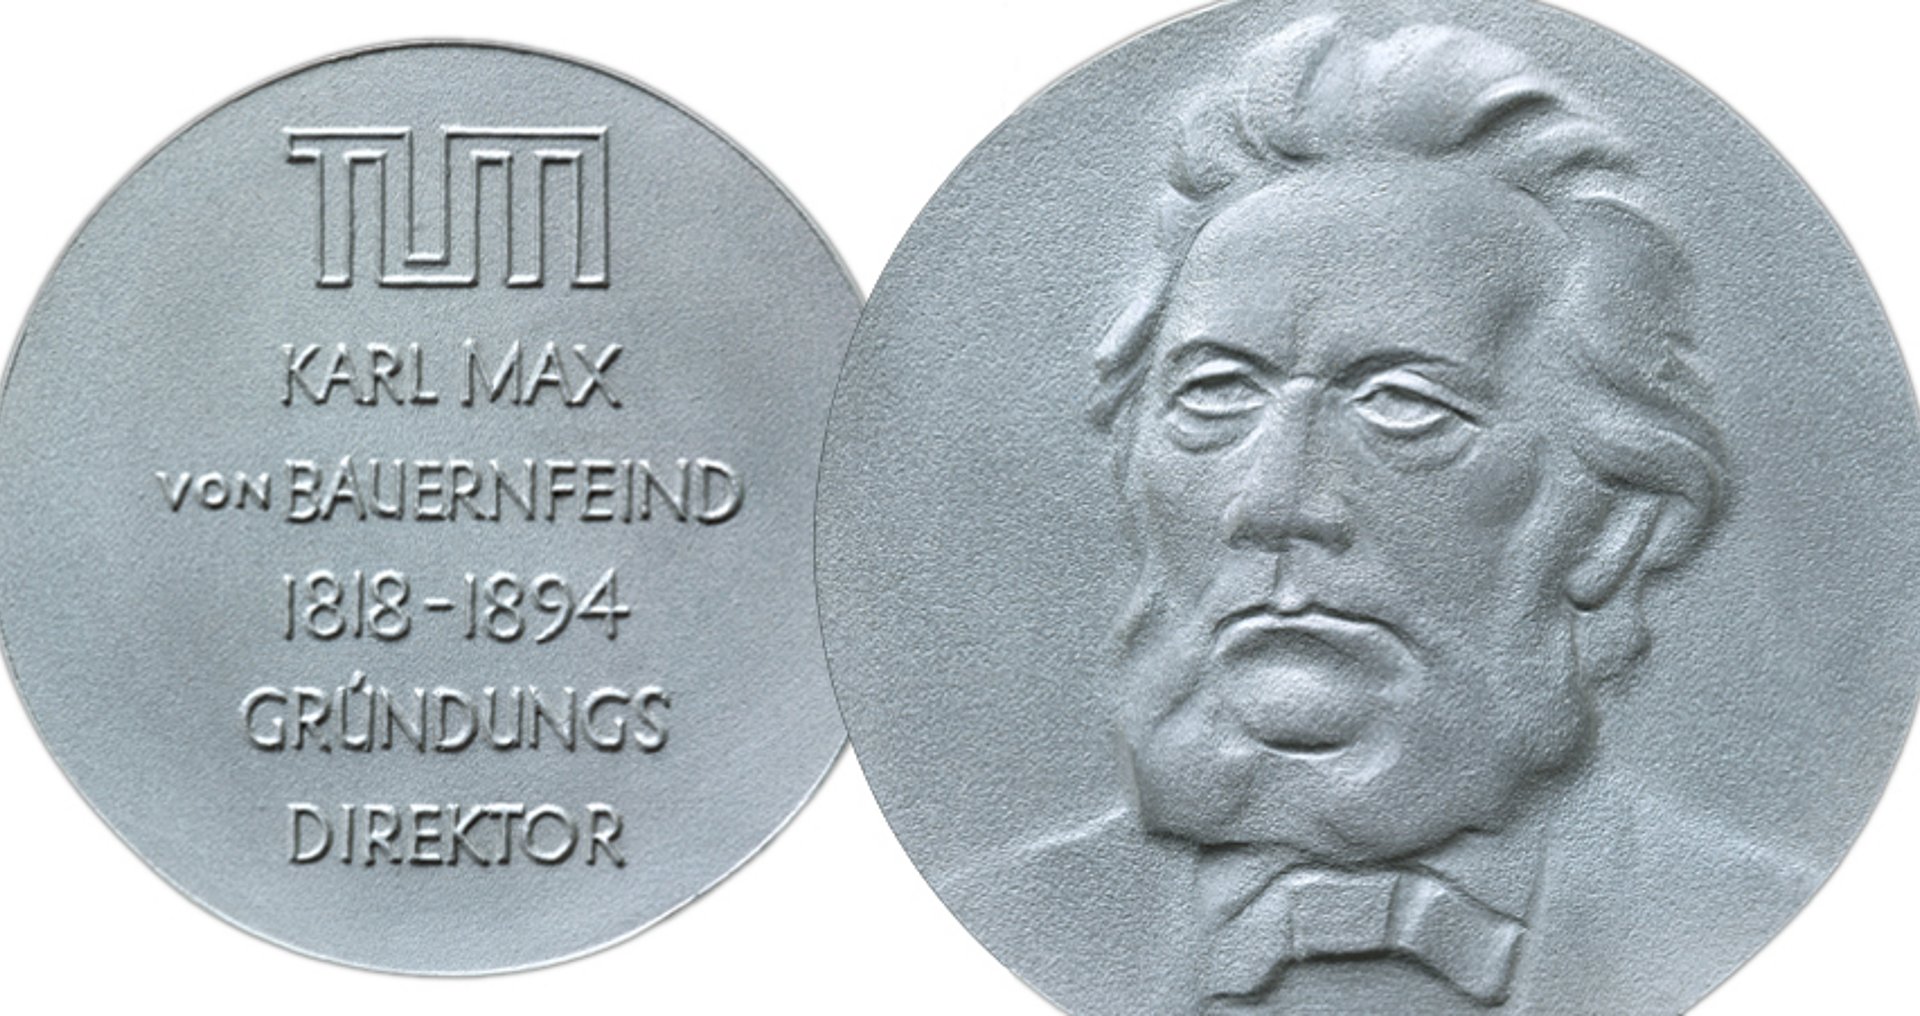 The Karl Max von Bauernfeind Medal is awarded to individuals in recognition of their services to the university